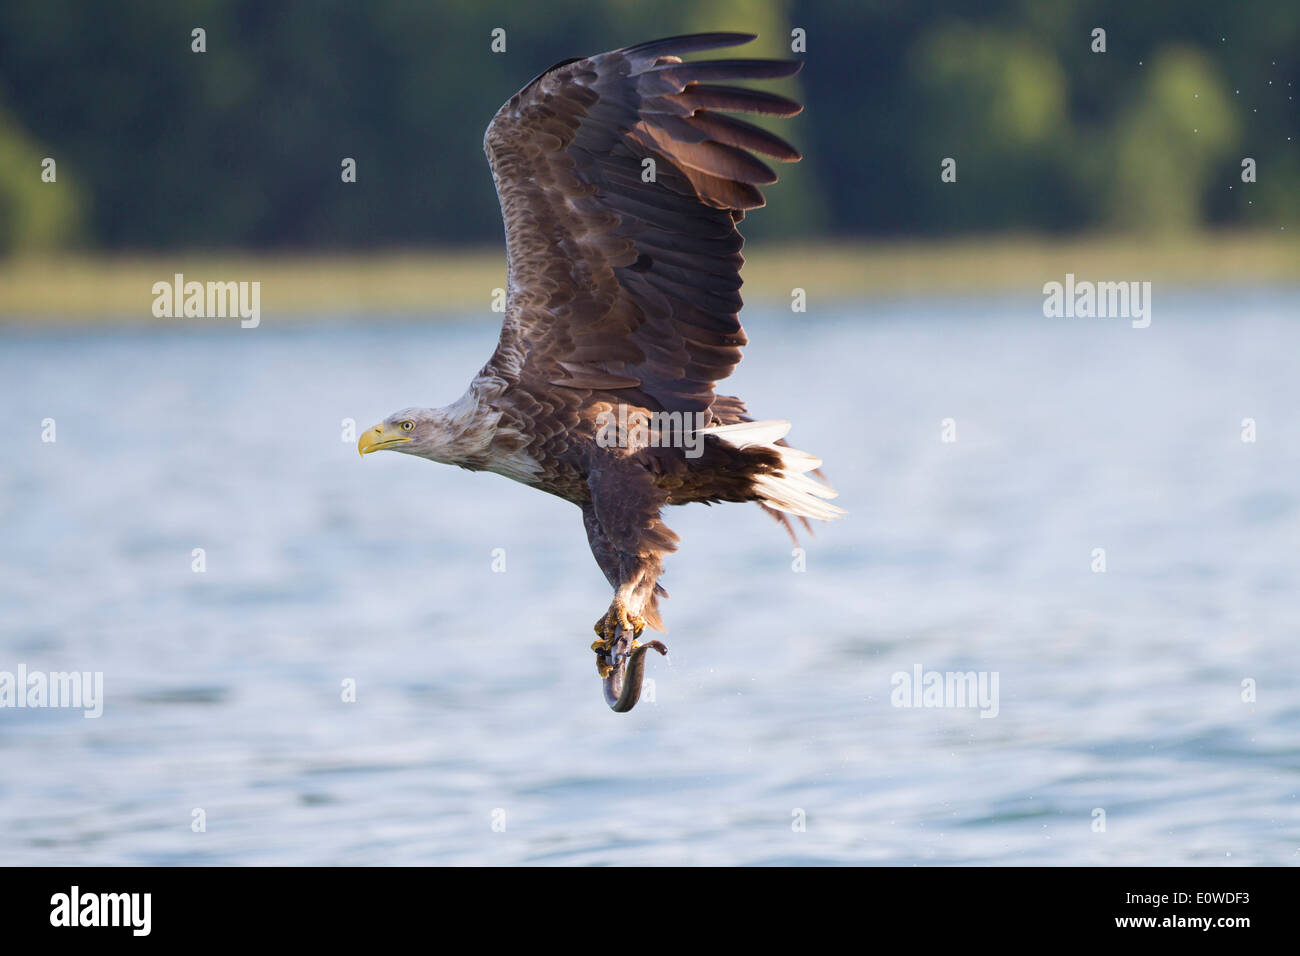 White-Tailed Eagle (Haliaeetus albicilla). Adult in flight carrying eel prey in its talons. Mecklenburg-Western Pomerania, Germa Stock Photo